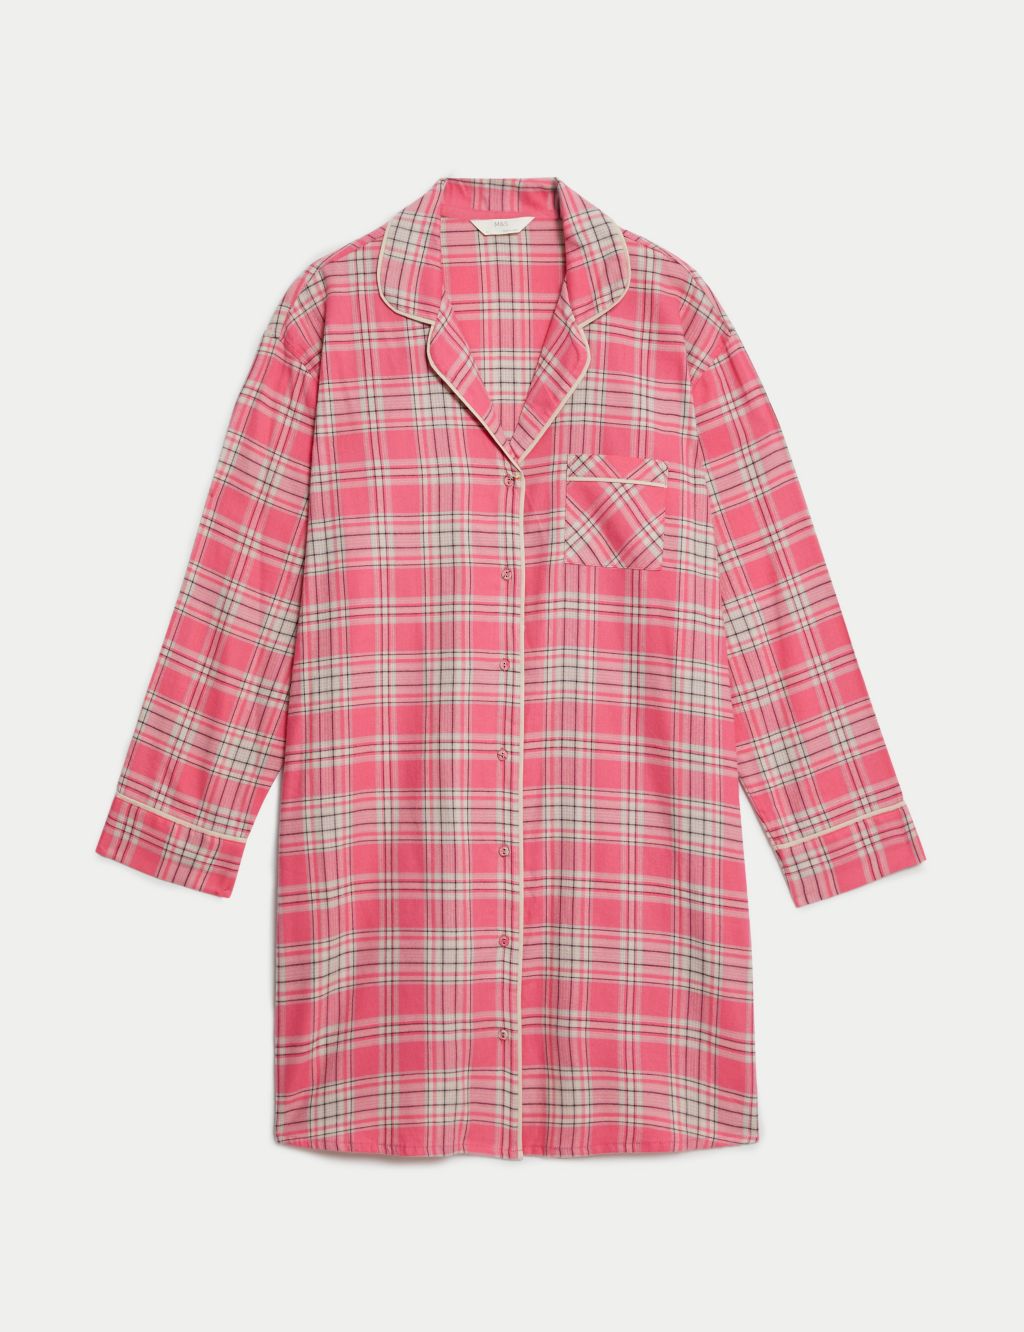 Cotton Blend Checked Nightshirt image 2